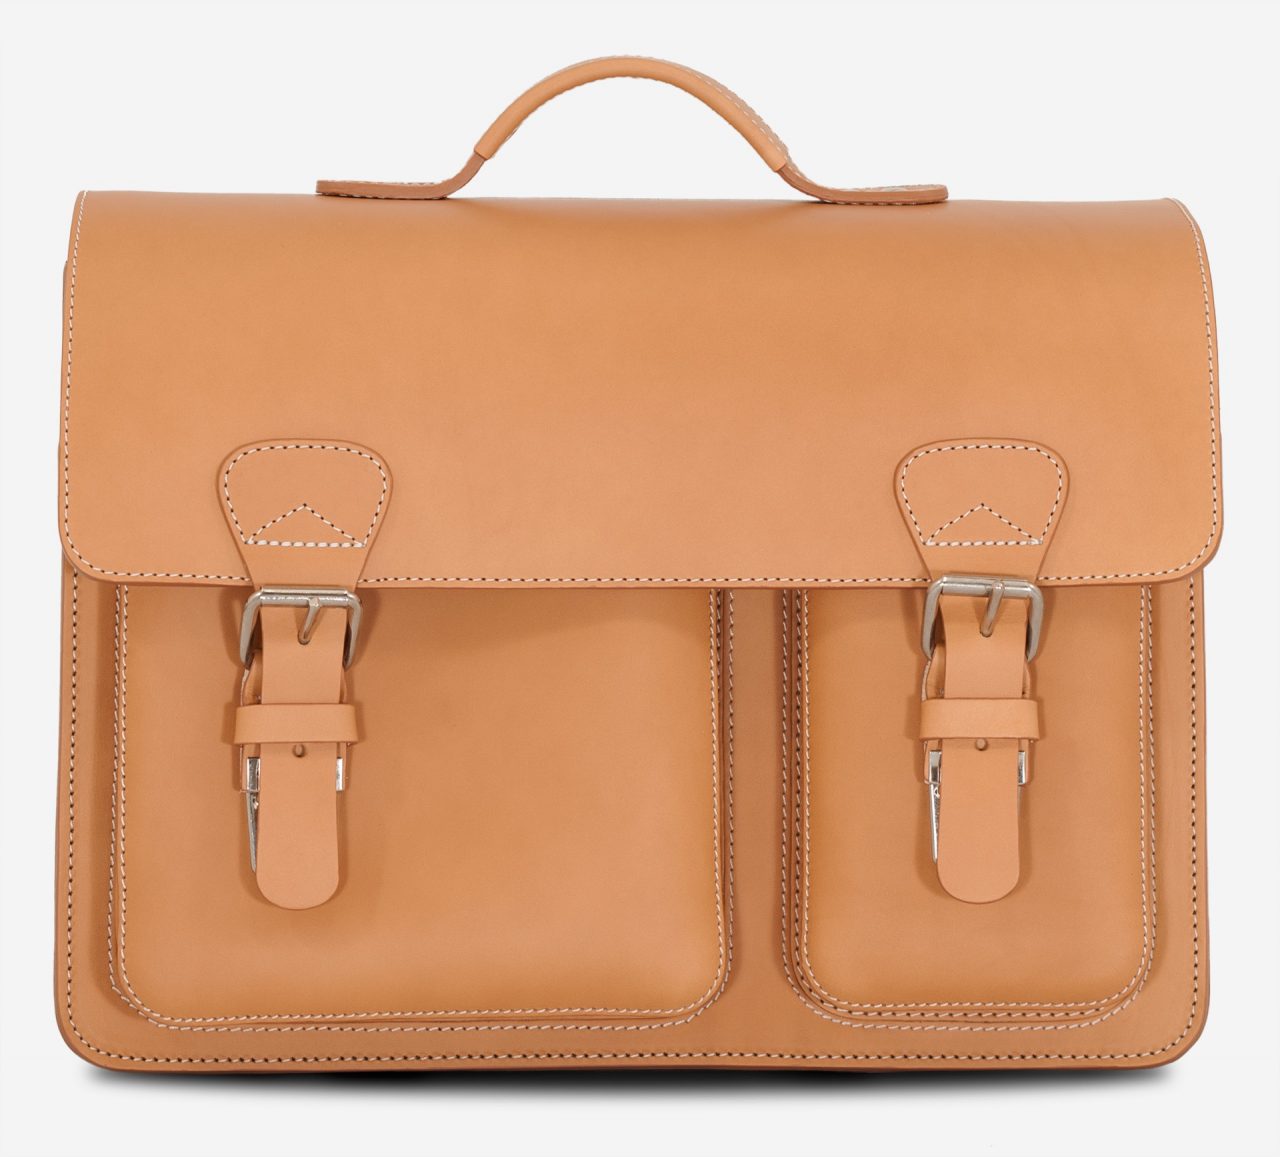 Front view of tan leather satchel briefcase with asymmetric front pockets.